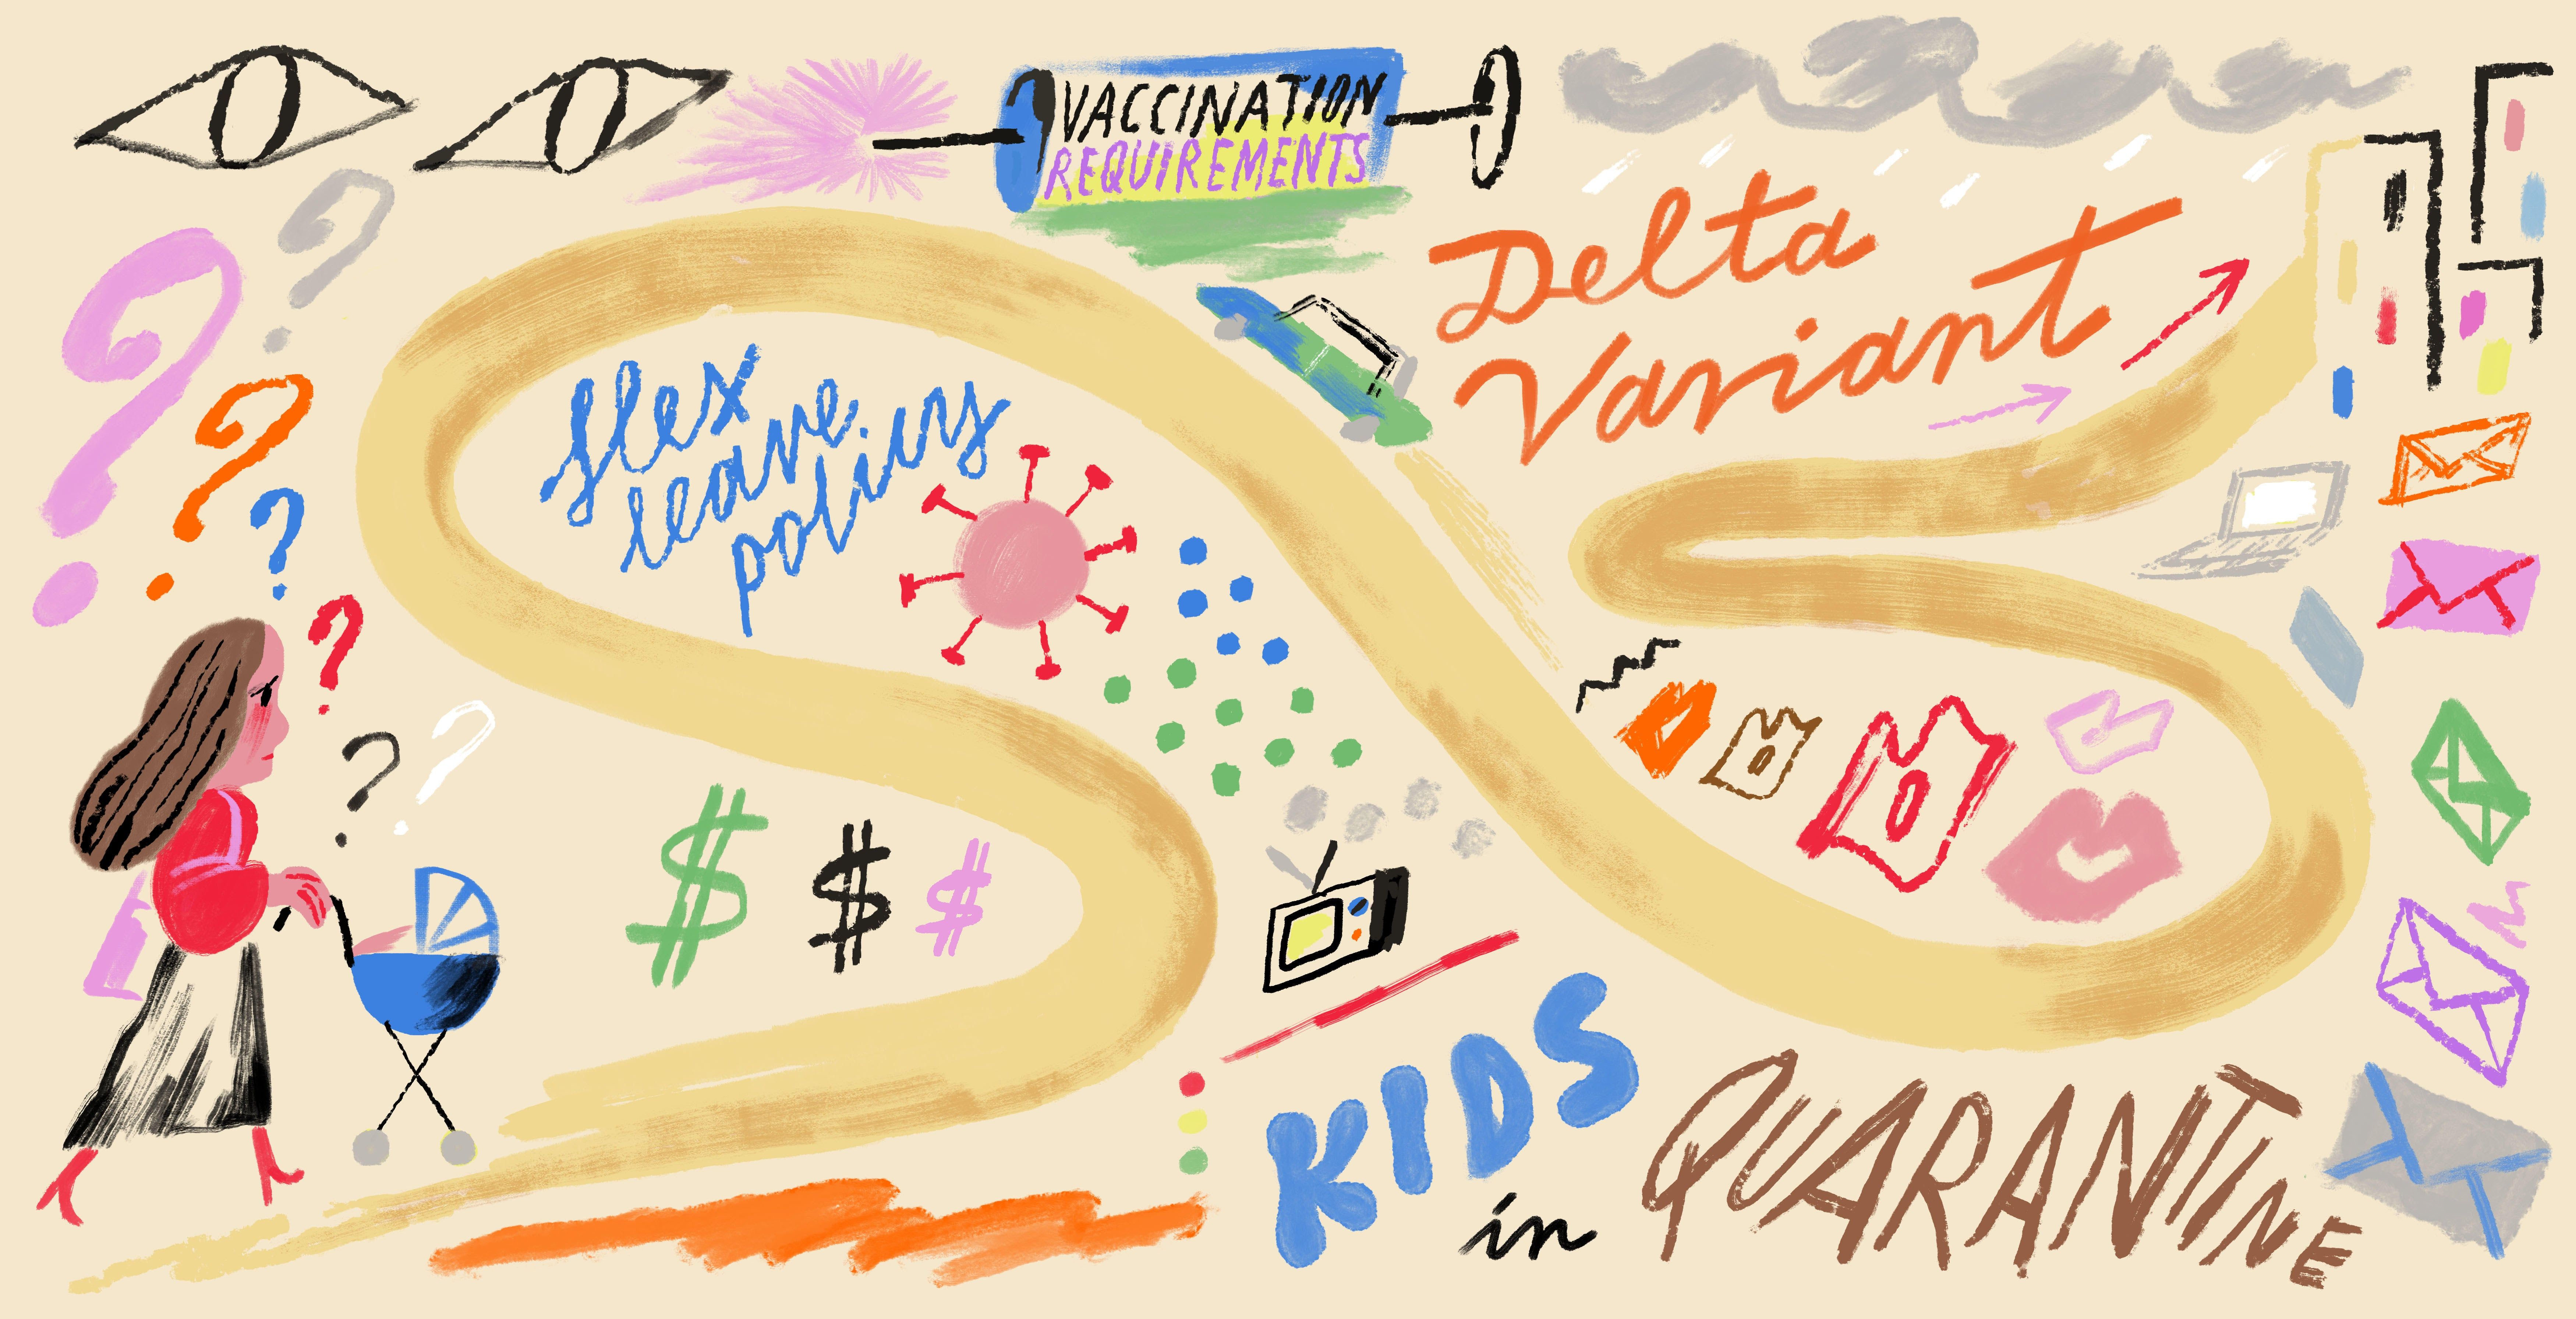 Illustration of a woman pushing a stroller down a road surrounded by words like delta variant, kids, and quarantine